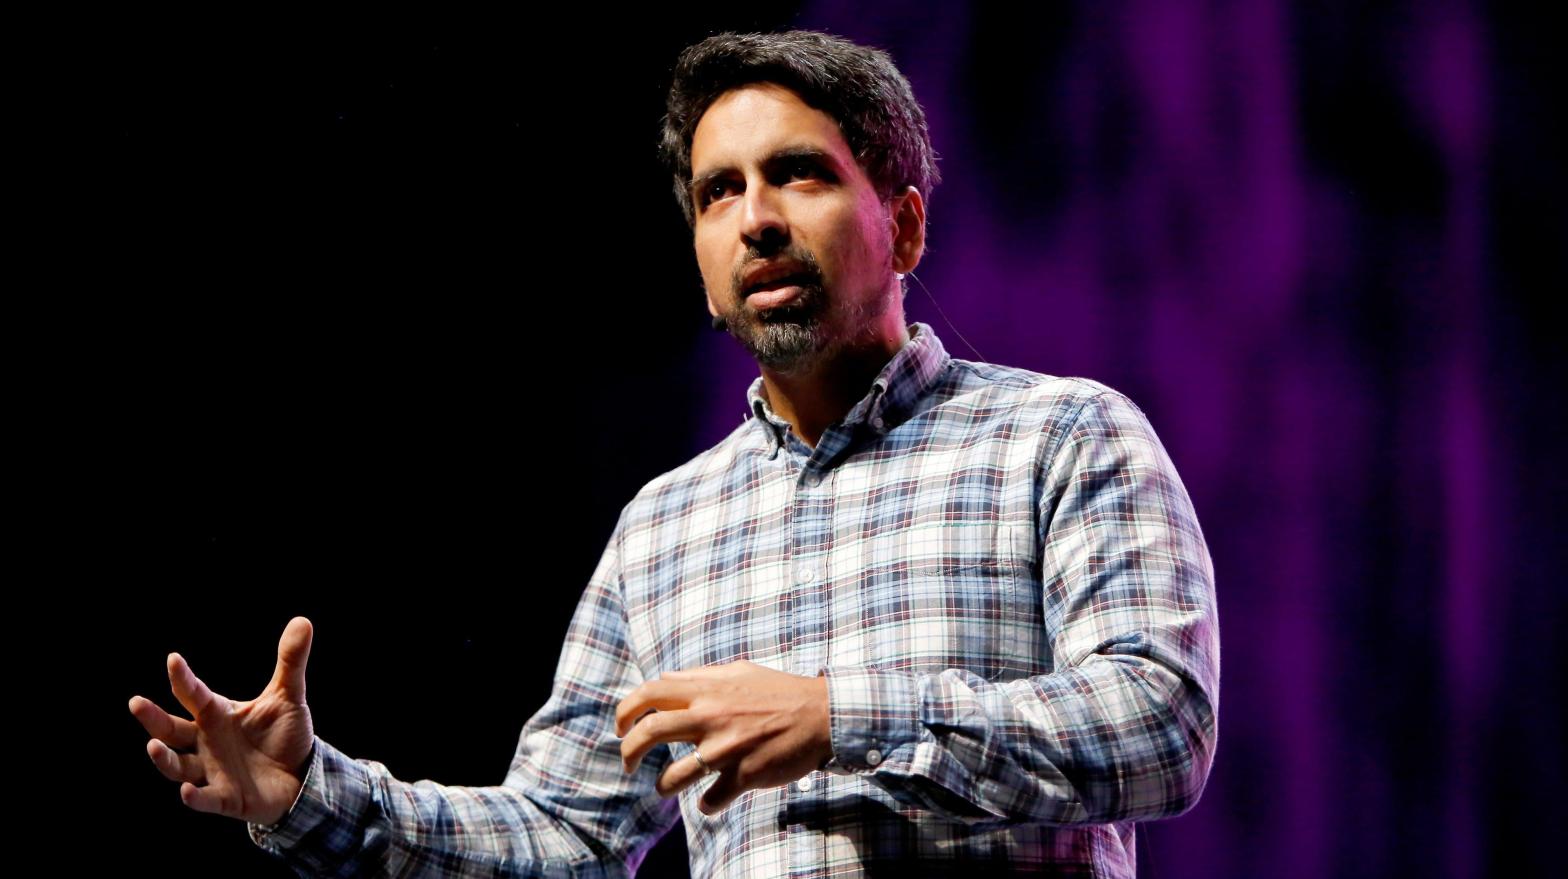 Sal Khan, the founder of Khan academy, straddles the divide between the Silicon Valley tech world and education. He says that while he's sceptical about some claims about modern AI systems, it will become an important tool for many aspects of education. (Photo: Rachel Murray, Getty Images)